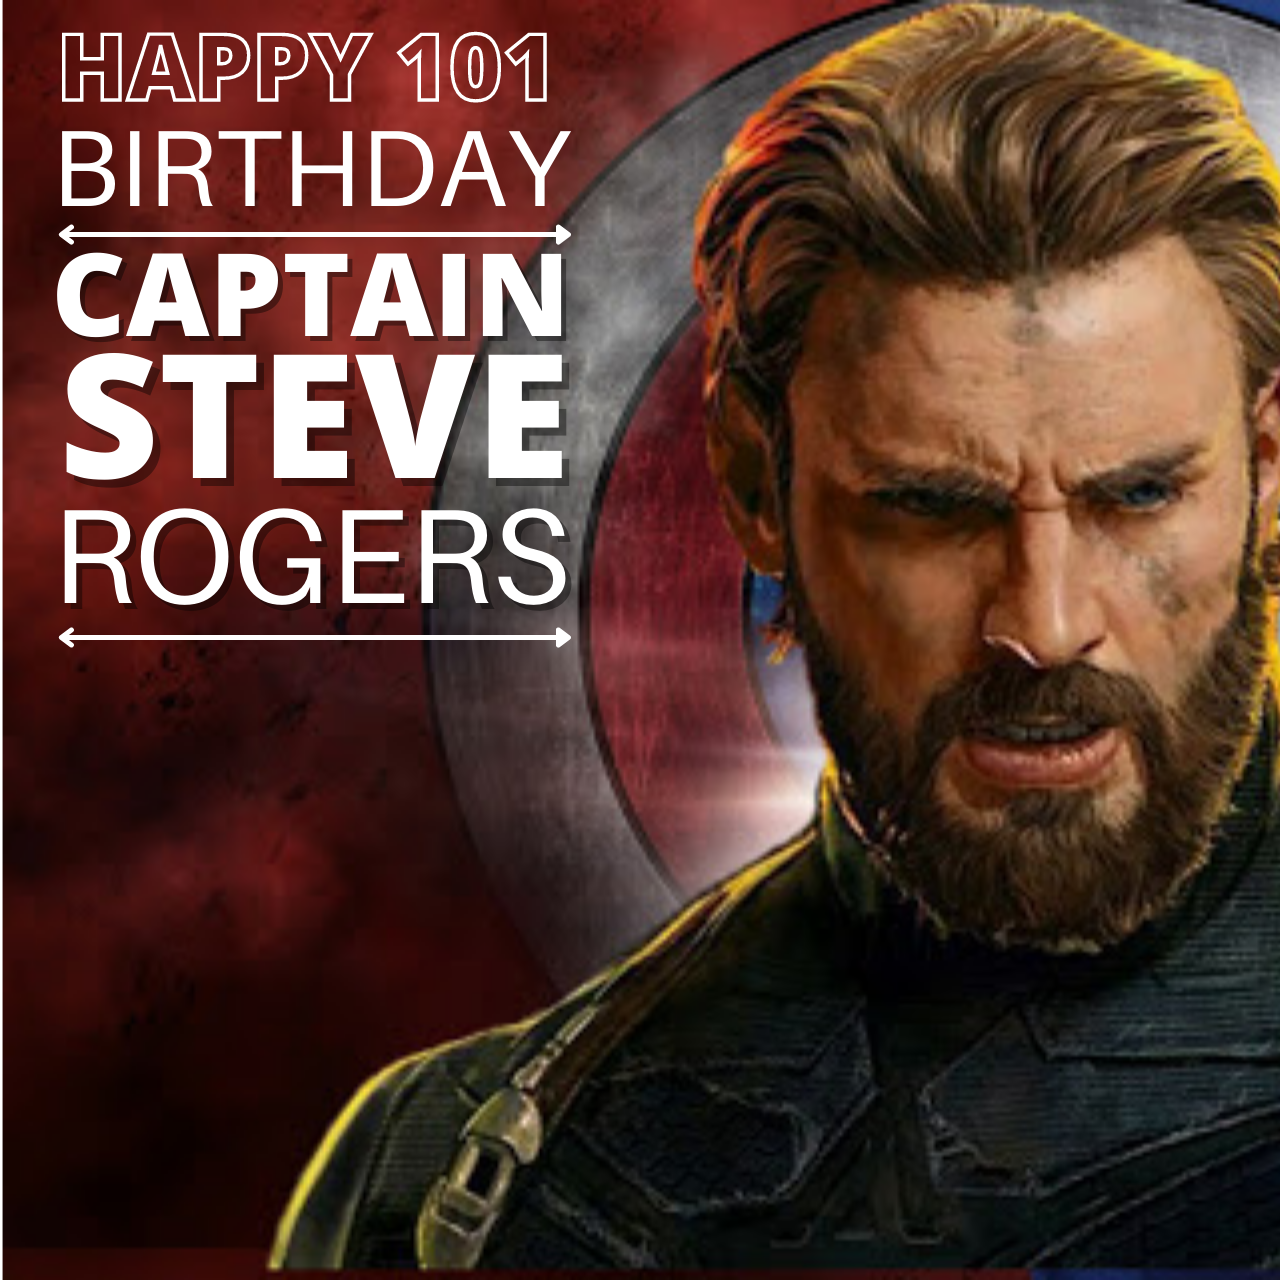 Happy Birthday Chris Evans: Wishes, Messages, Images (photos), Greetings, and WhatsApp Status Video Download to greet Captain America